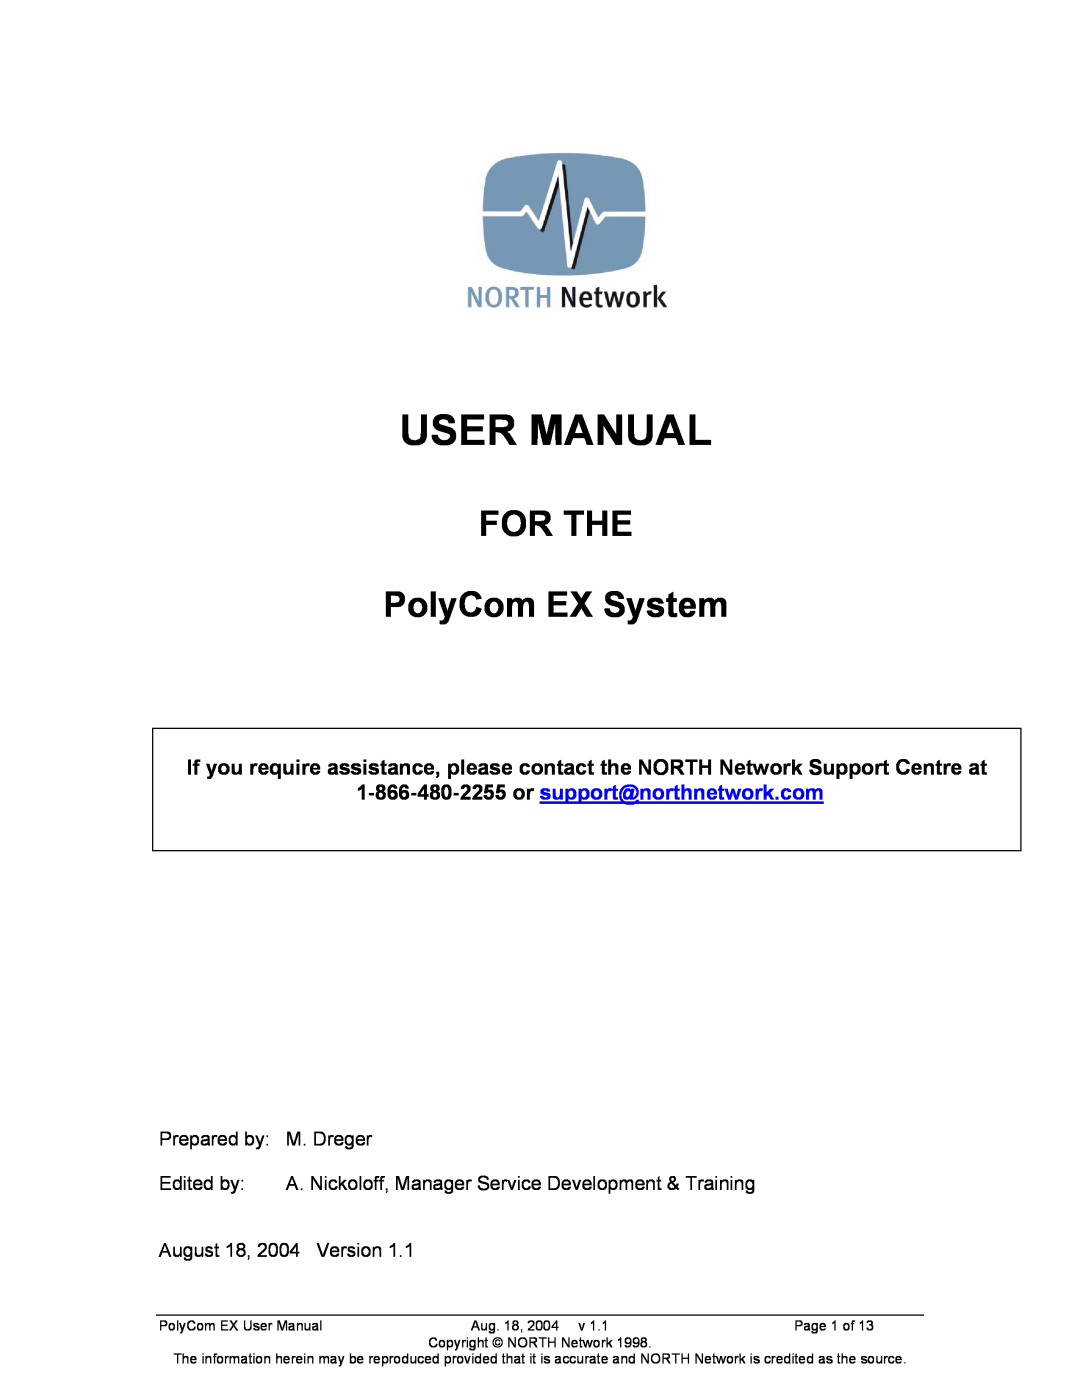 Polycom The Remote Control user manual FOR THE PolyCom EX System, PolyCom EX User Manual, Aug. 18, 2004 v, Page 1 of 